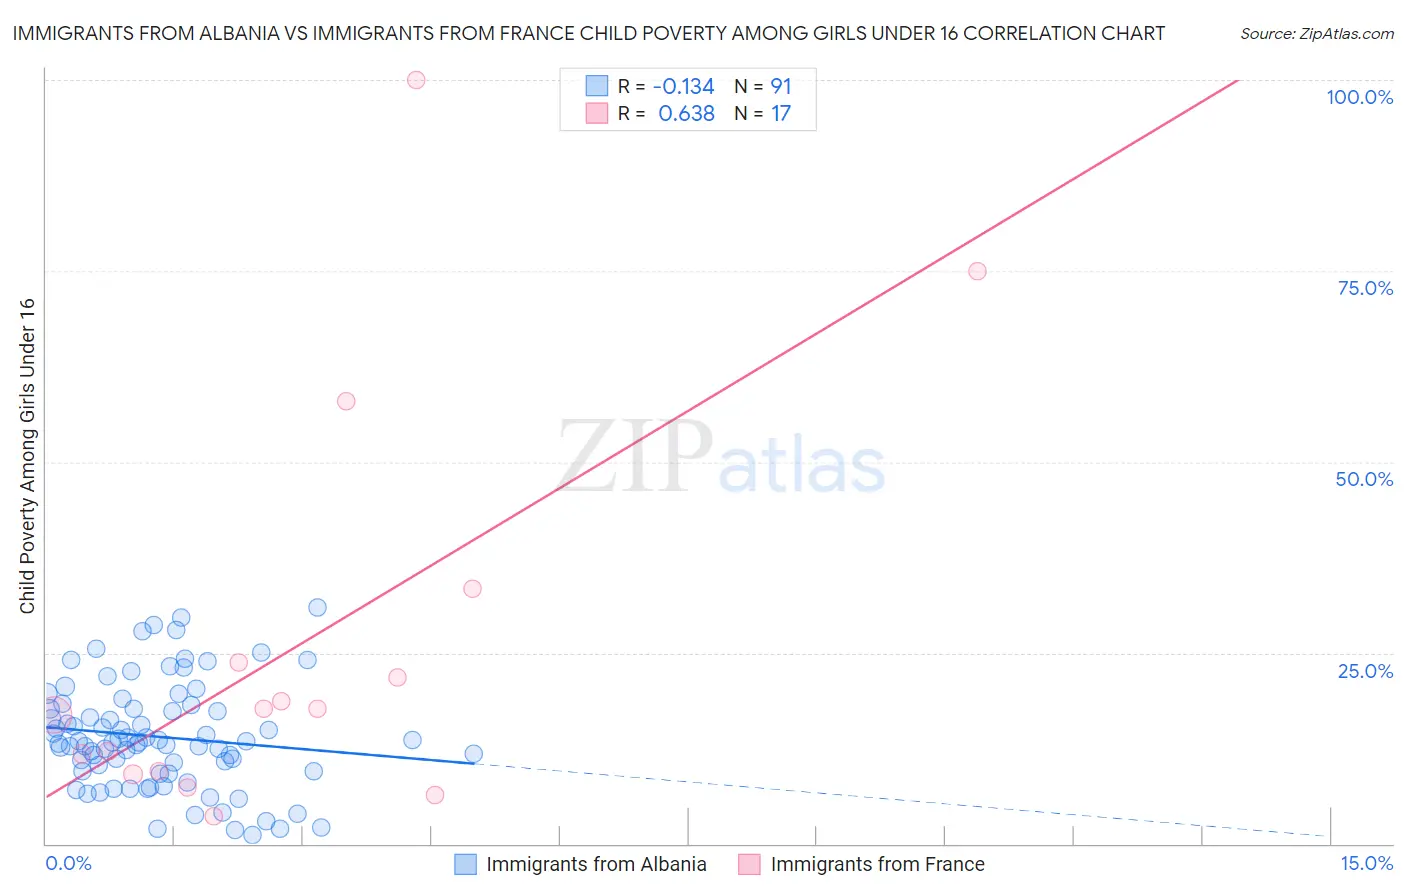 Immigrants from Albania vs Immigrants from France Child Poverty Among Girls Under 16